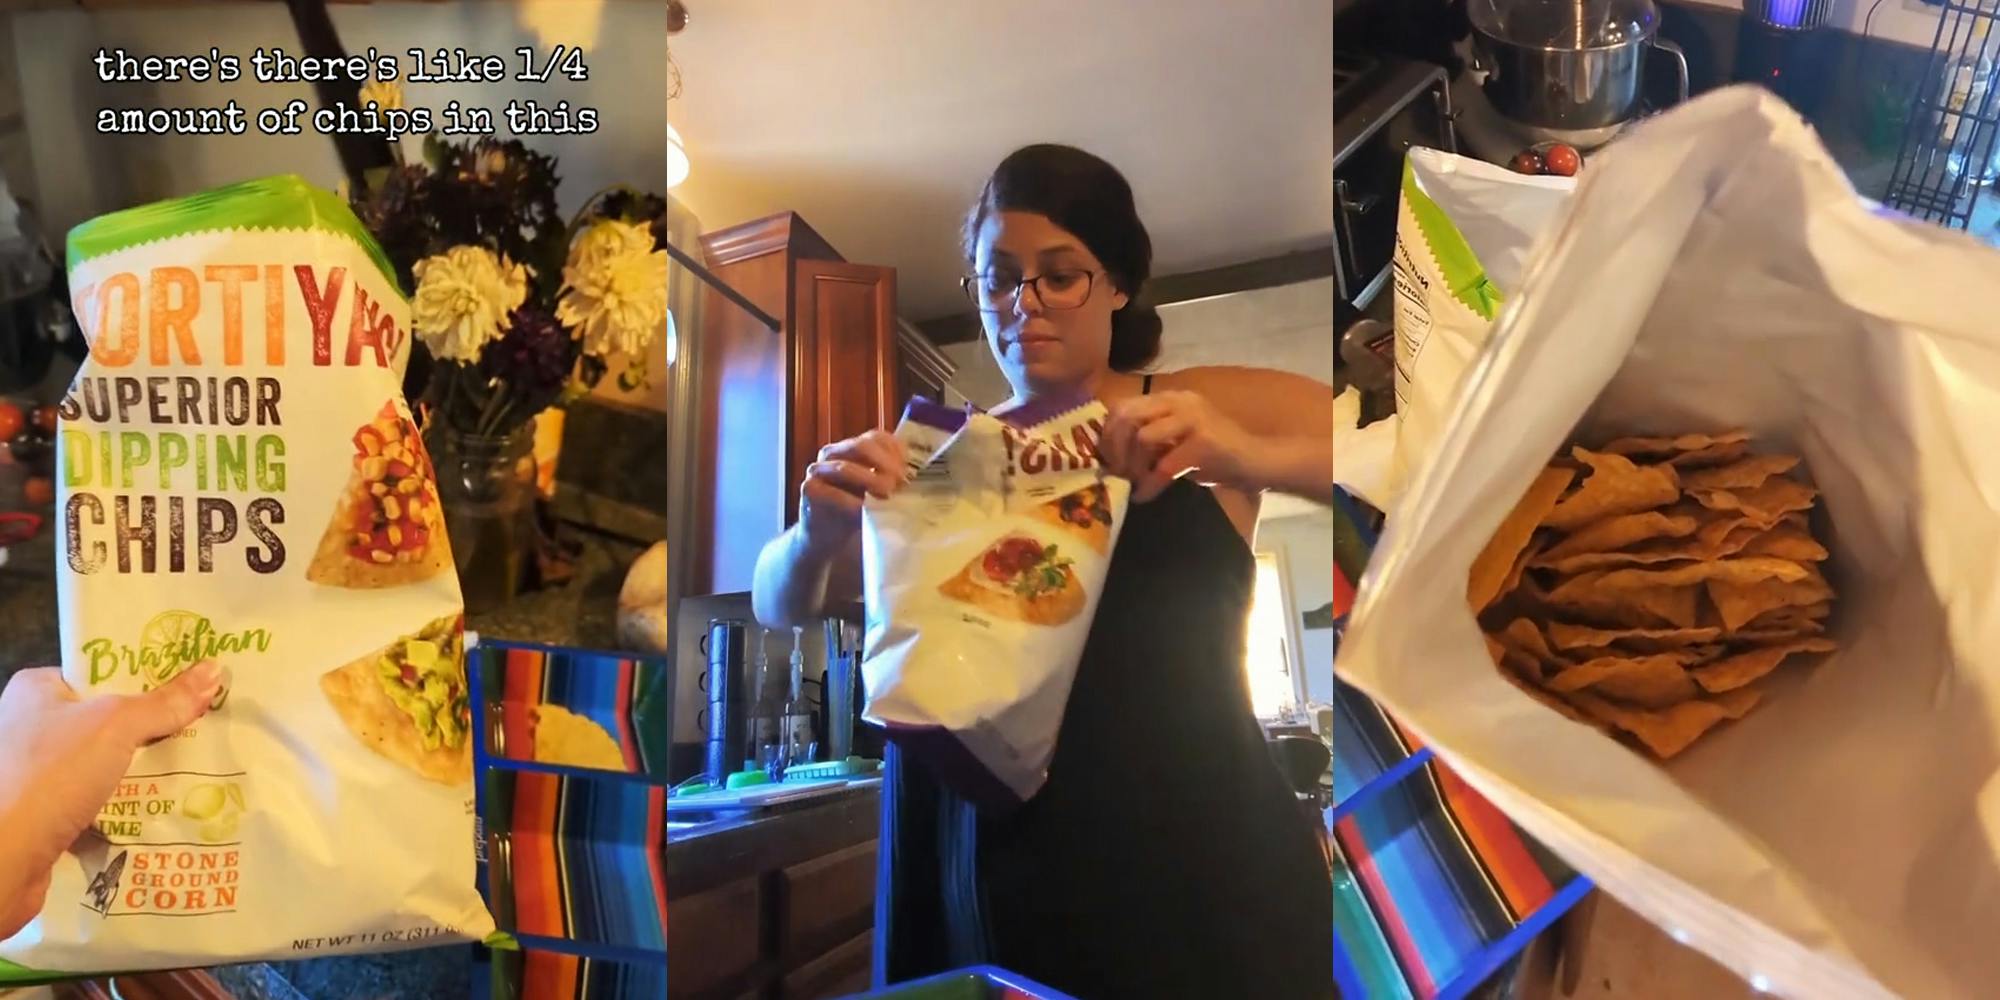 Tortiyahs! chip bag with caption "there's like 1/4 amount of chips in this bag" (l) woman opening Tortiyahs! bag of chips (c) Tortiyahs! chip bag open (r)